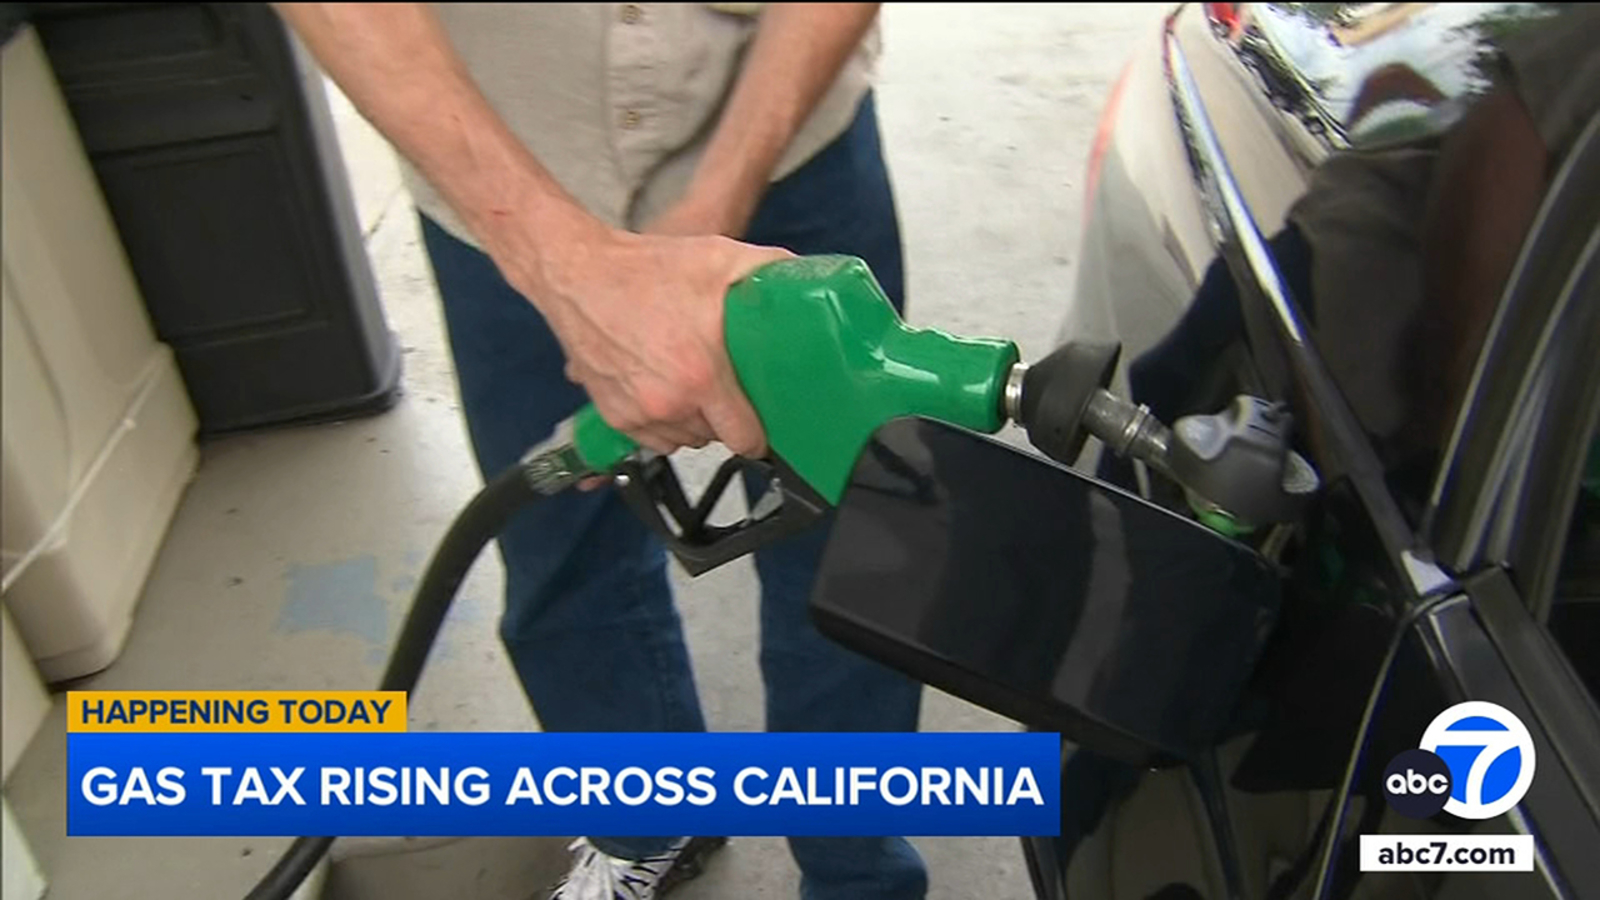 California gas prices rise 2 cents a gallon based on CPI